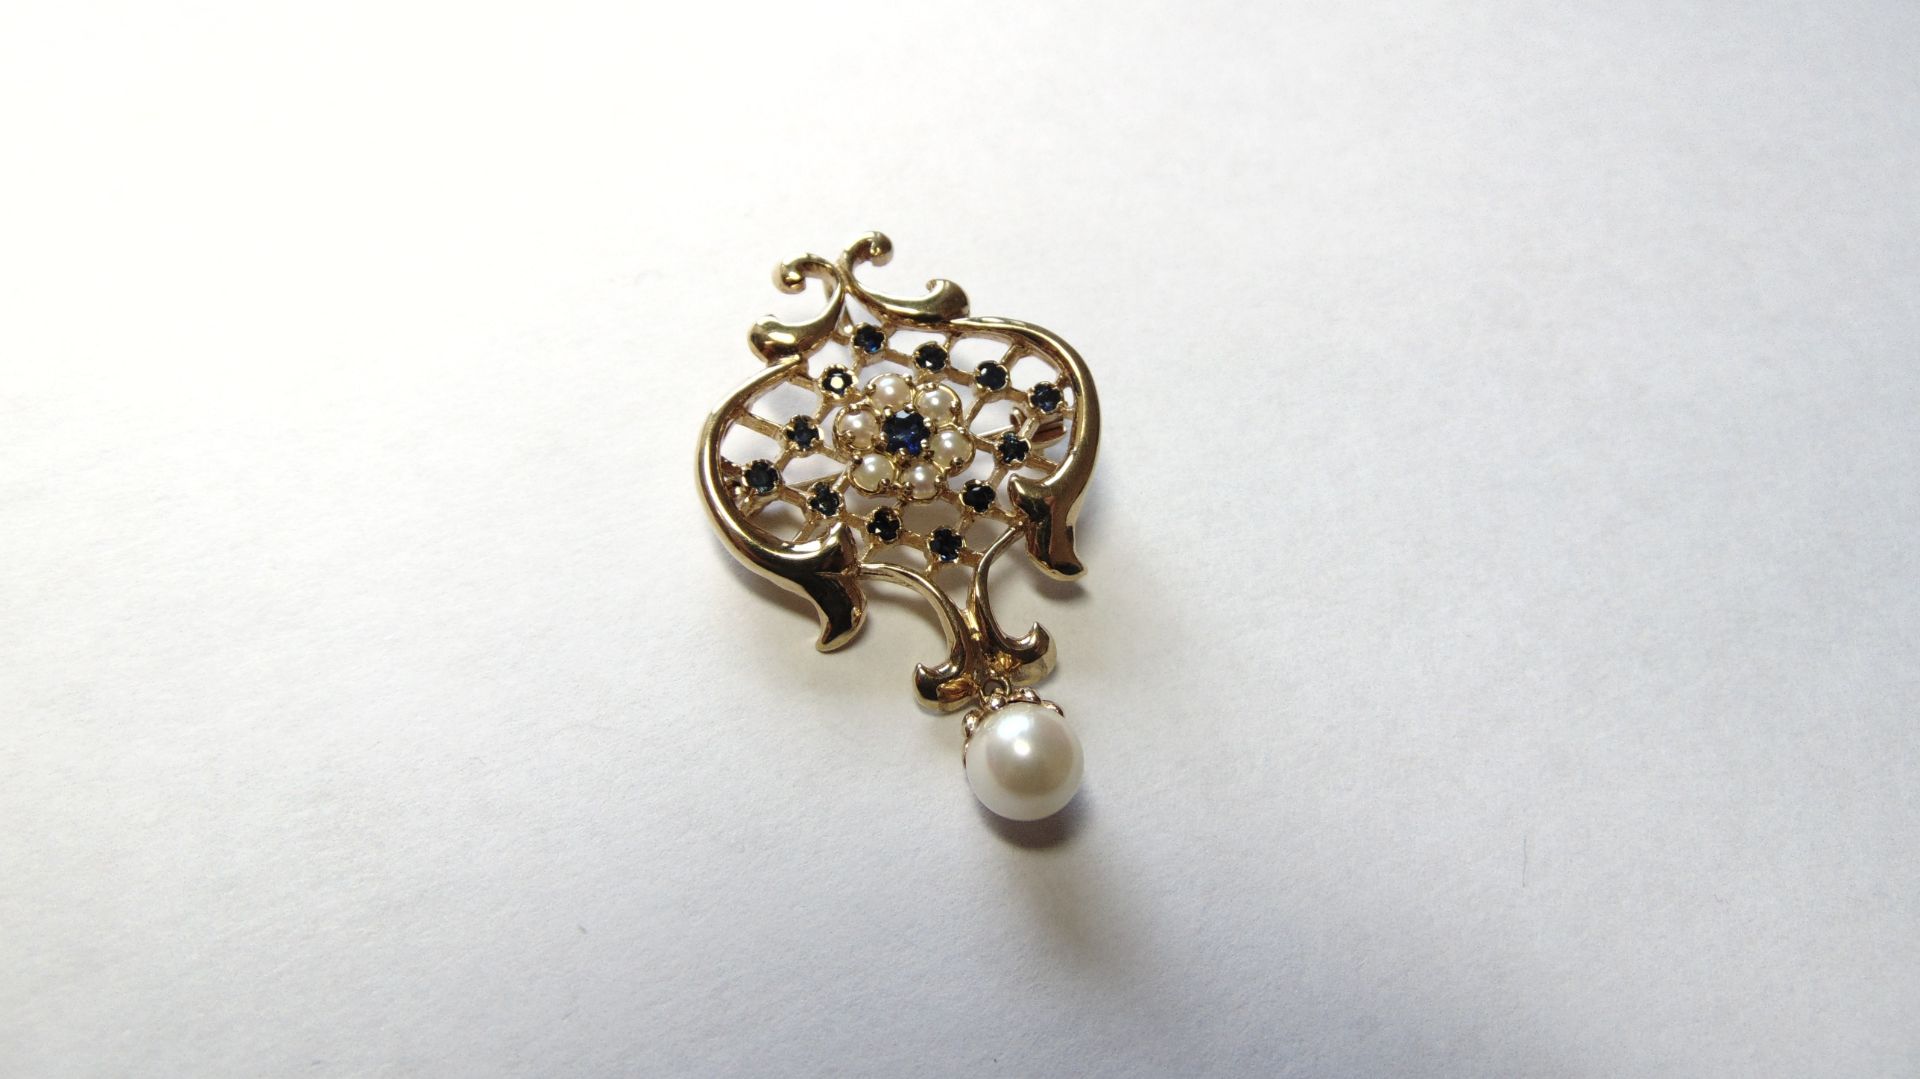 9ct Yellow Gold Sapphire and Cultured/Seed Pearl Brooch Pendant